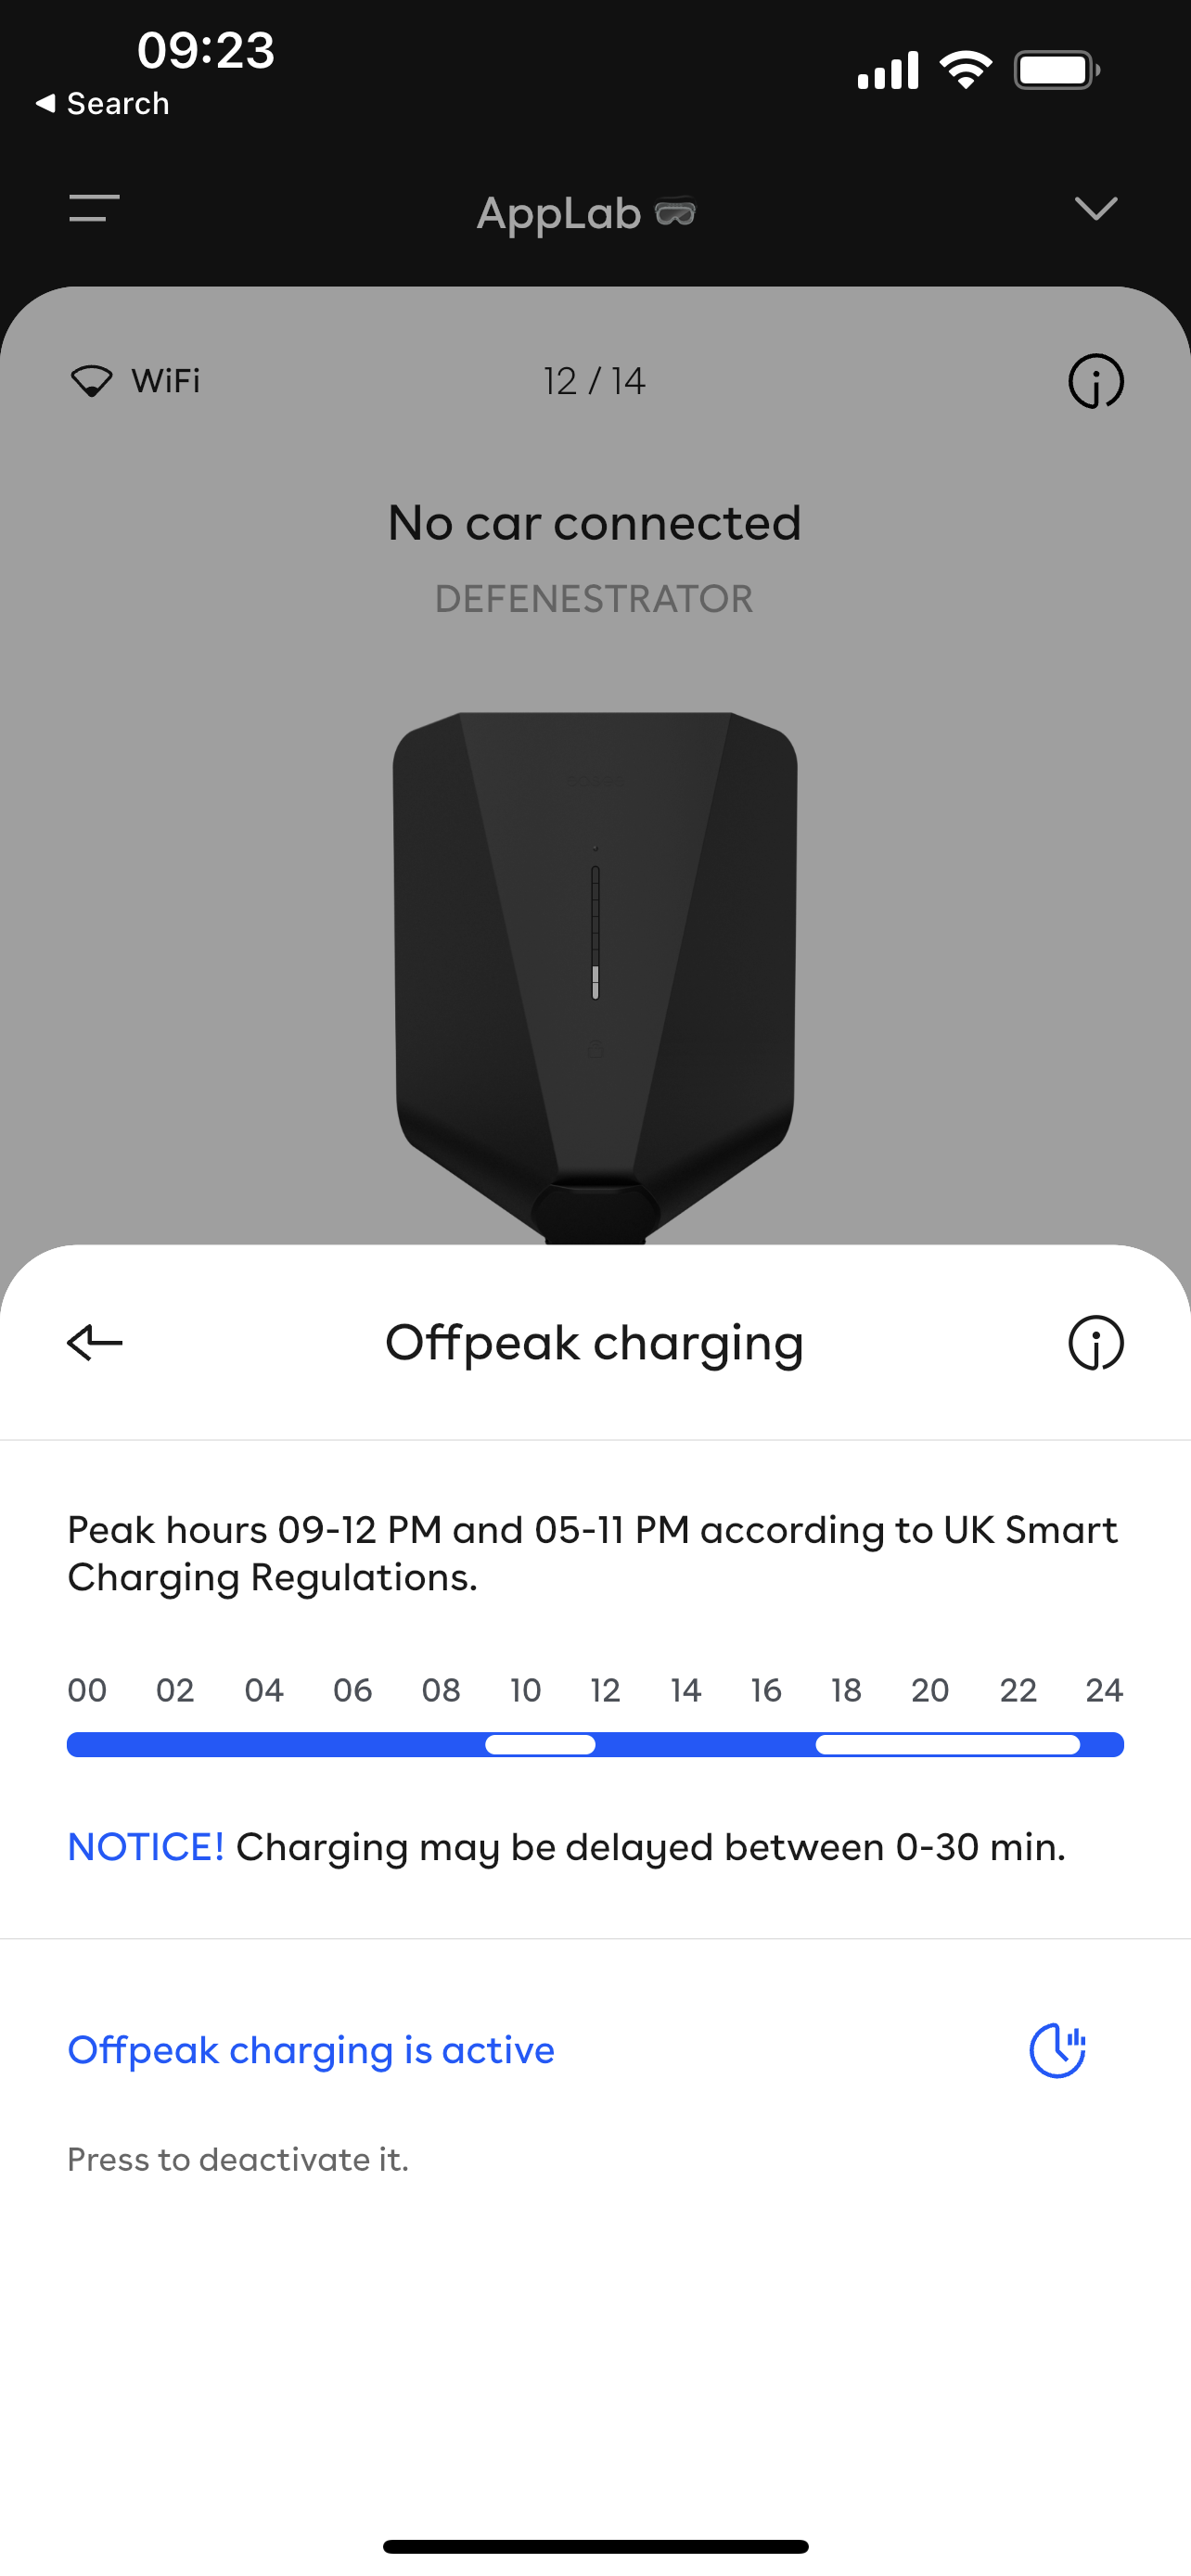 The Offpeak charging is in blue, active.